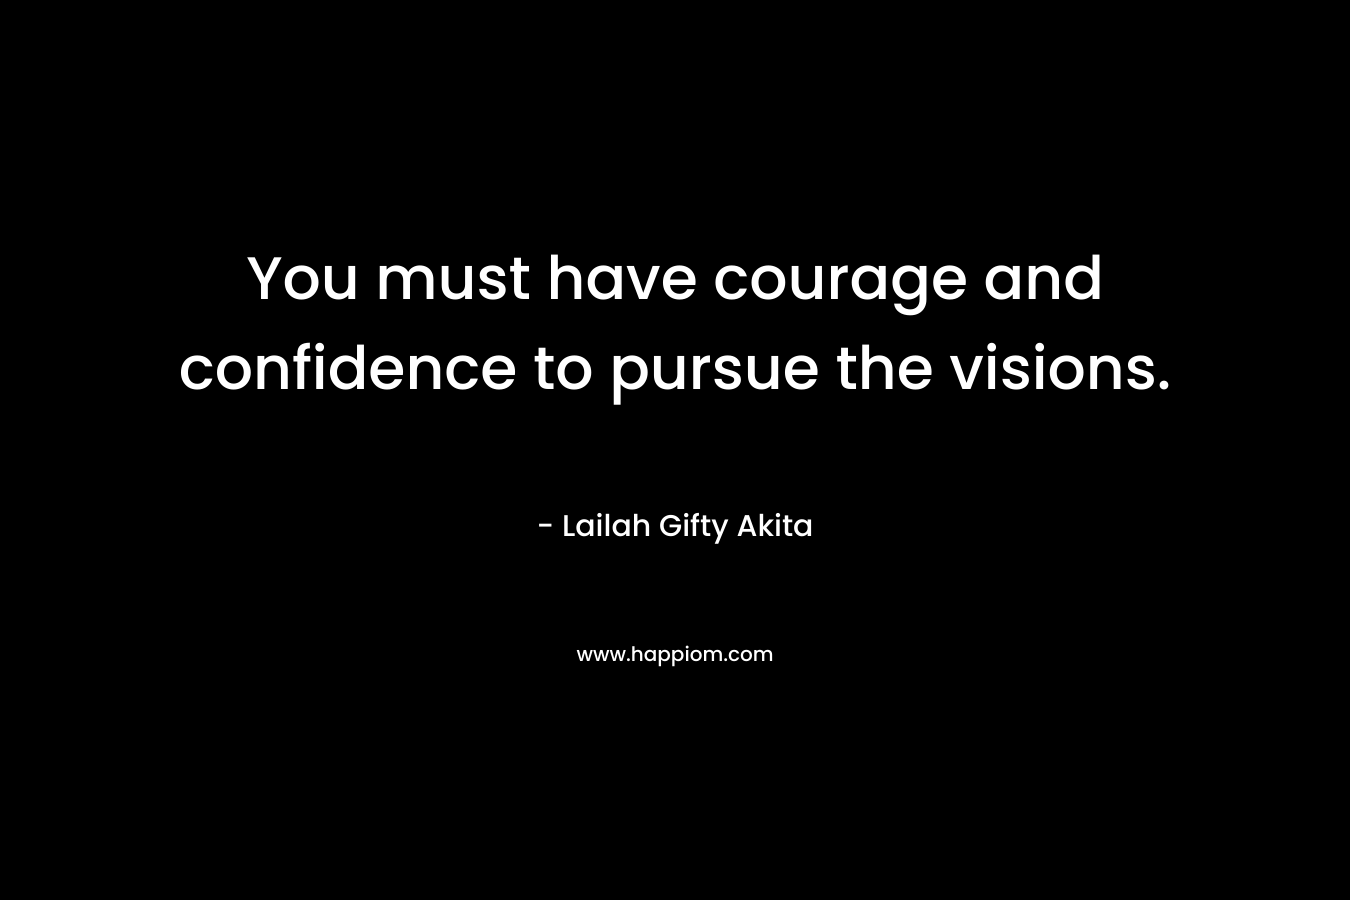 You must have courage and confidence to pursue the visions.